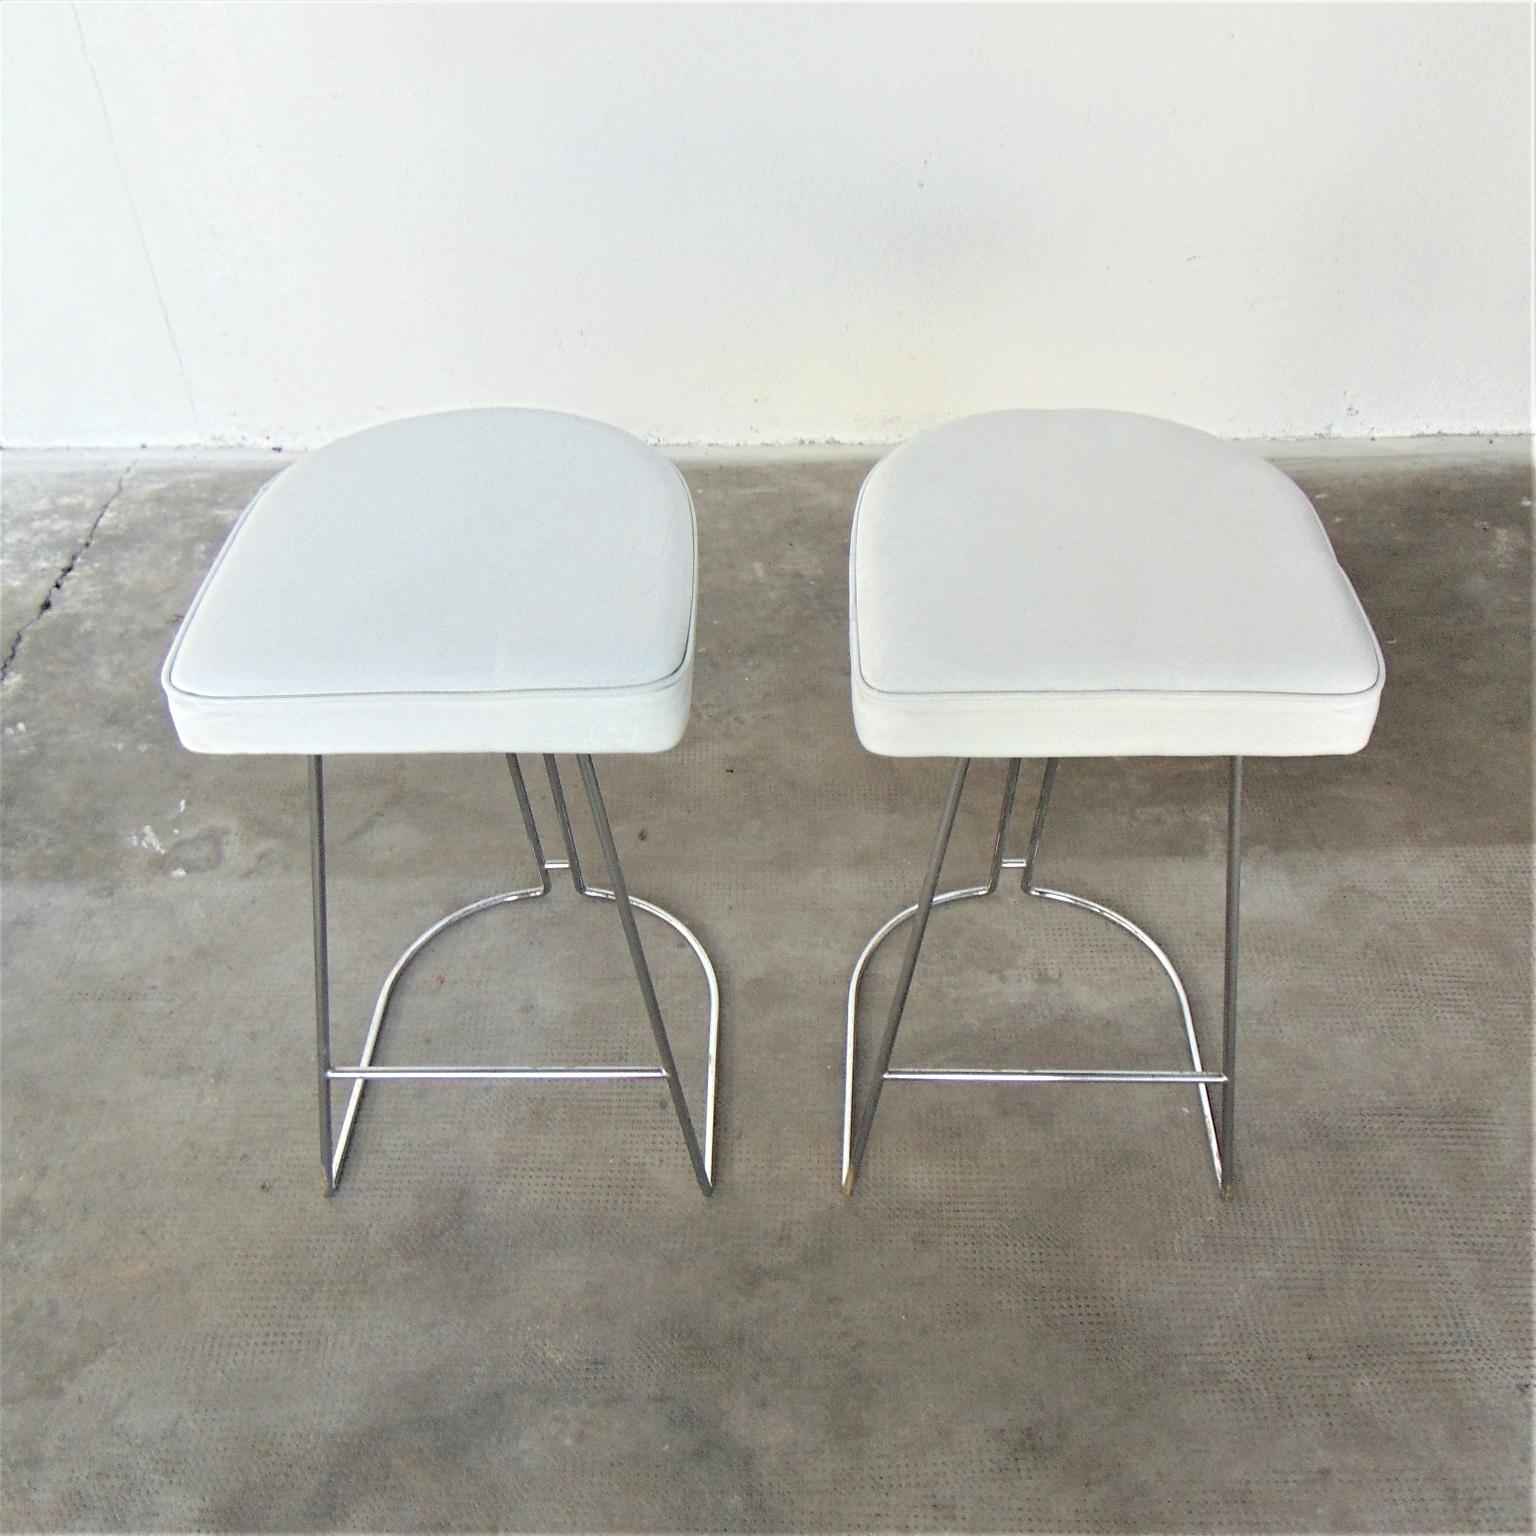 Italian 1983 Barstools Set White Leather and Chromed Steel by Sormani, Italy For Sale